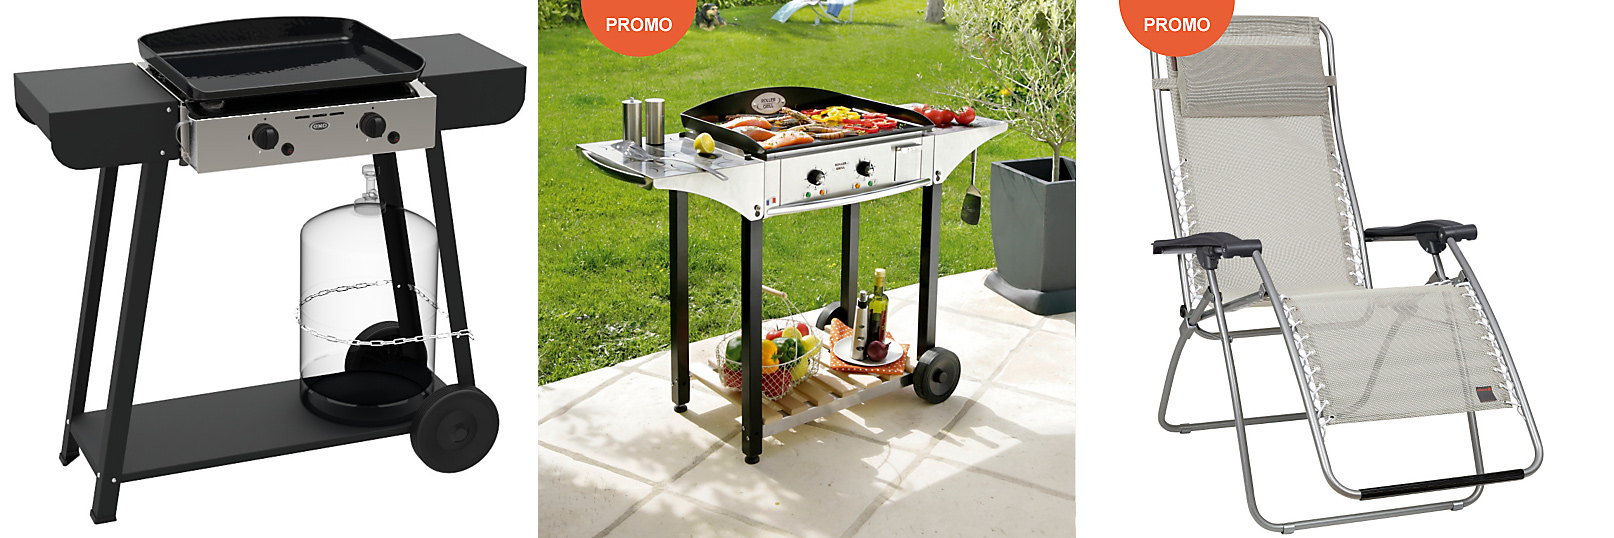 Camif,planchas et barbecues